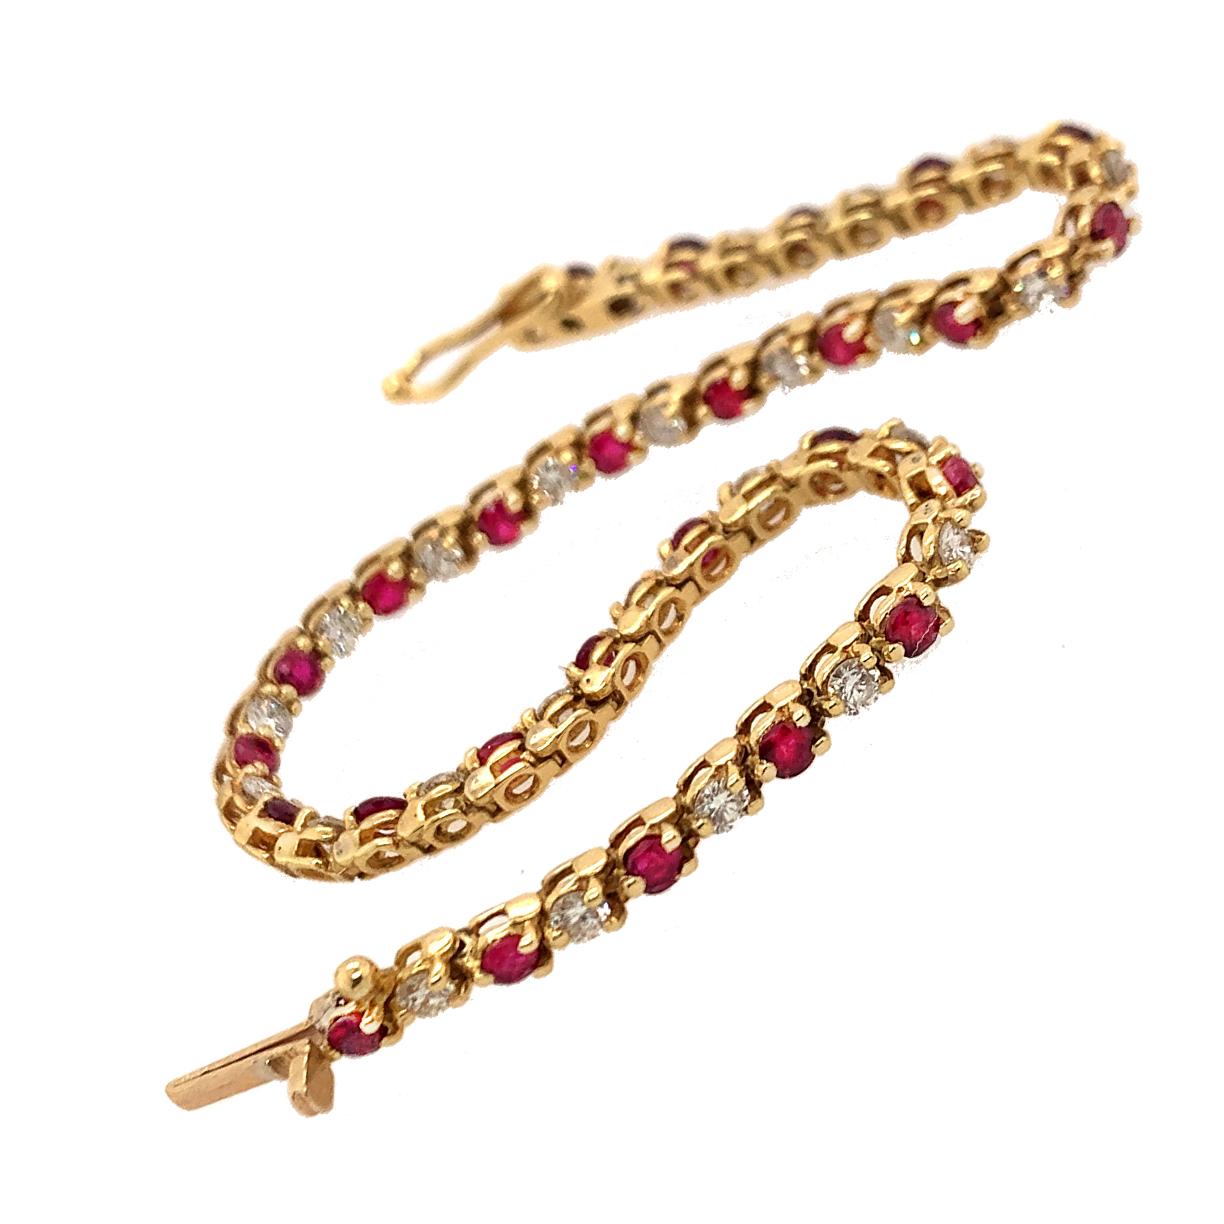 A classic riviere bracelet bracelet with alternating brilliant diamonds and rubies.  Made and signed by TIFFANY & CO.  18K yellow gold.  Approximately 2.34 carats of rubies and 1.56 carats of diamonds (there are 26 of each stone).  Safety clasp. 